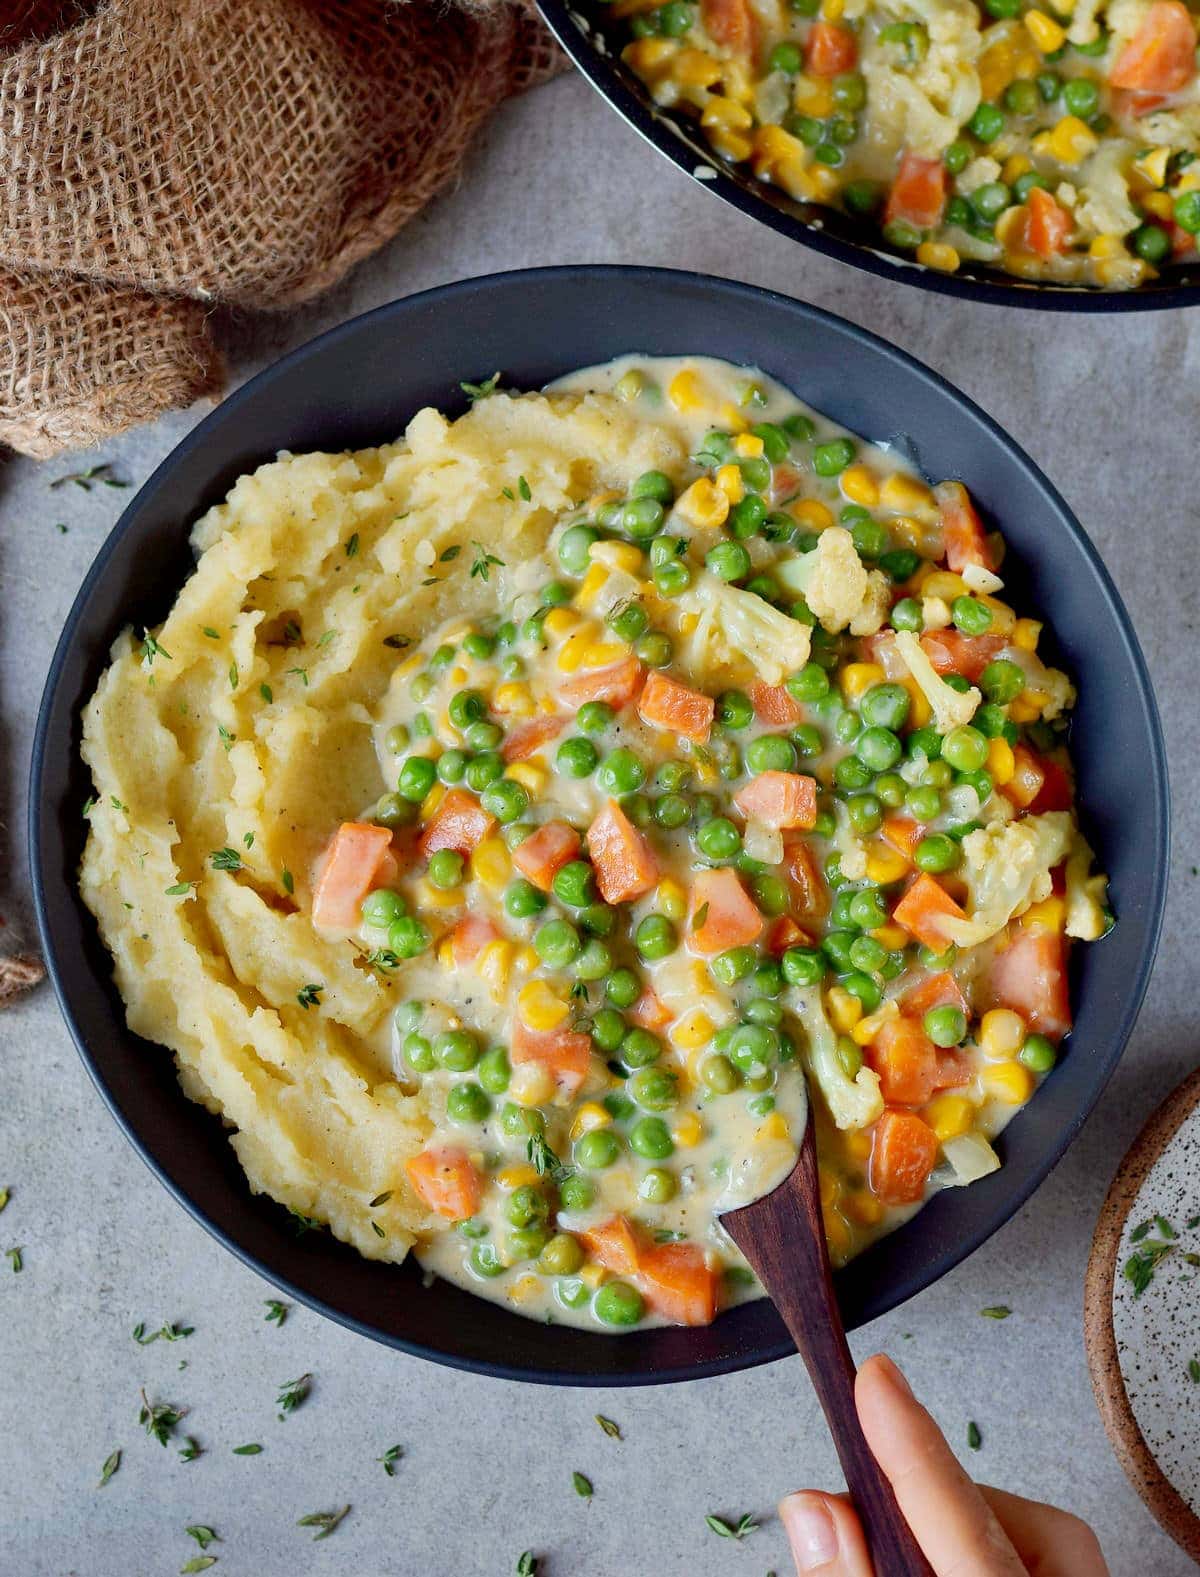 Creamed Peas And Carrots | With Mashed Potatoes (Vegan) - Elavegan